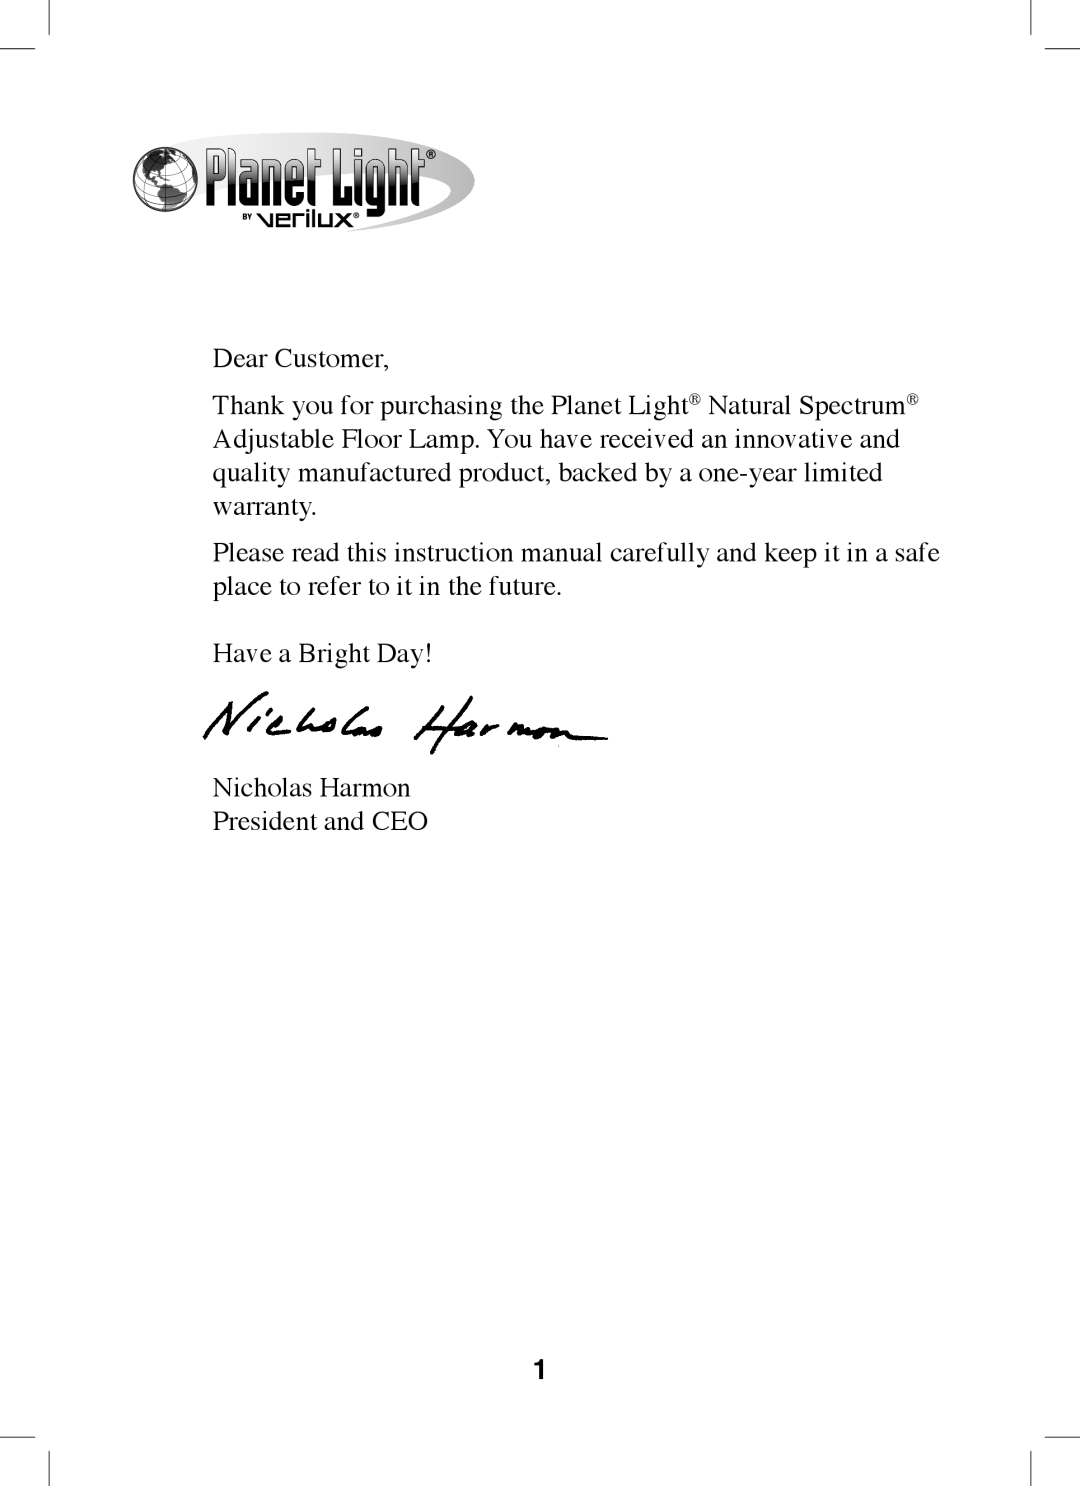 Verilux PL05 manual Have a Bright Day Nicholas Harmon, President and CEO 